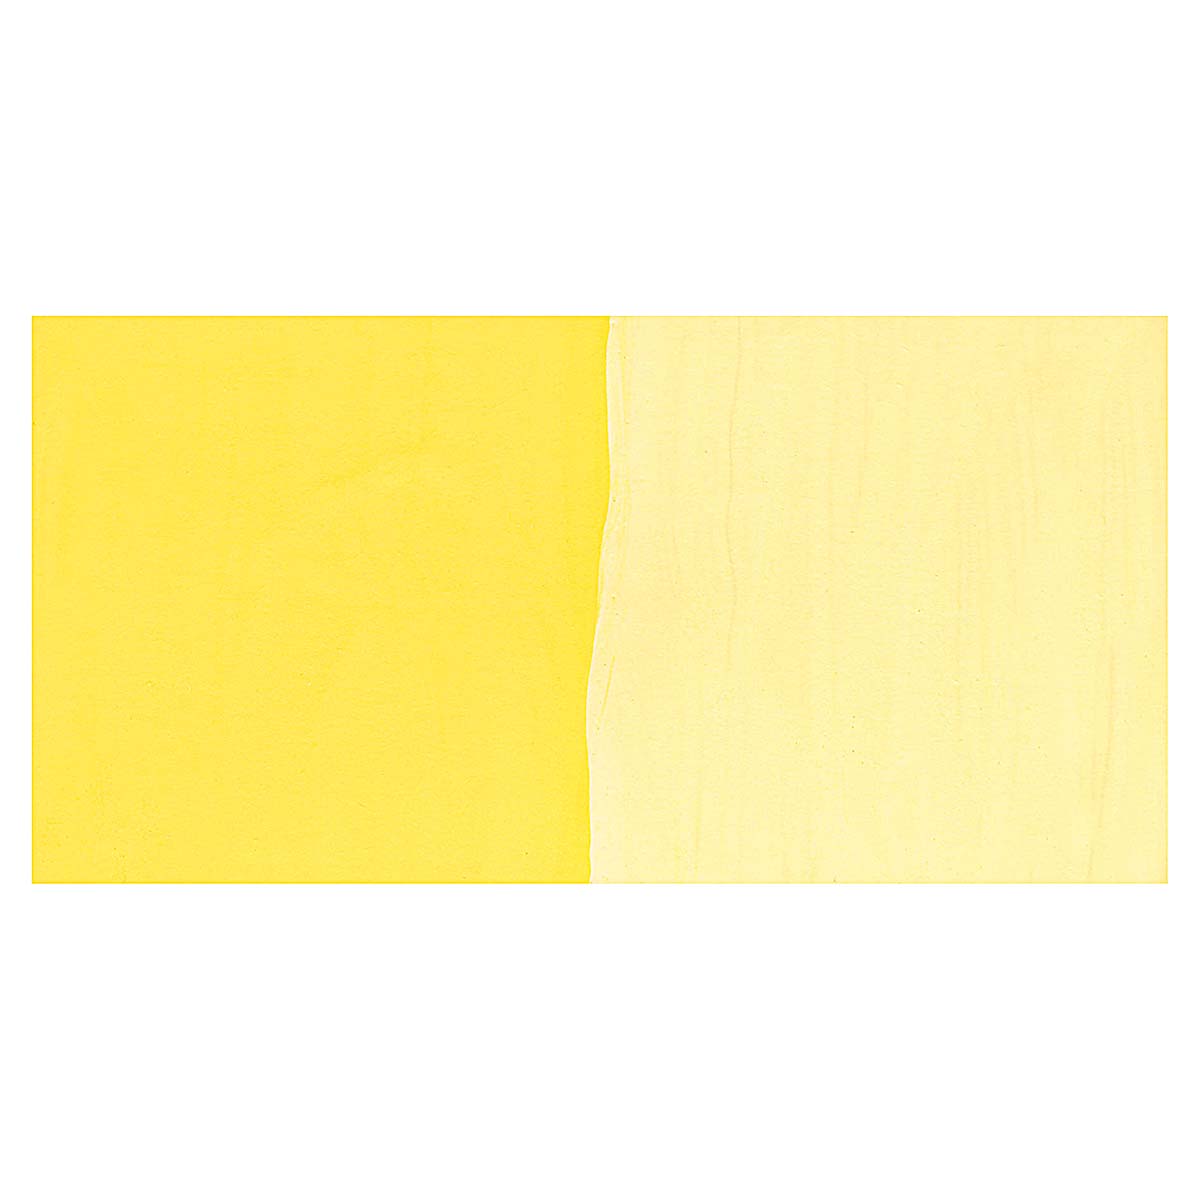 Faber-Castell Tempera Paint 8 oz Yellow